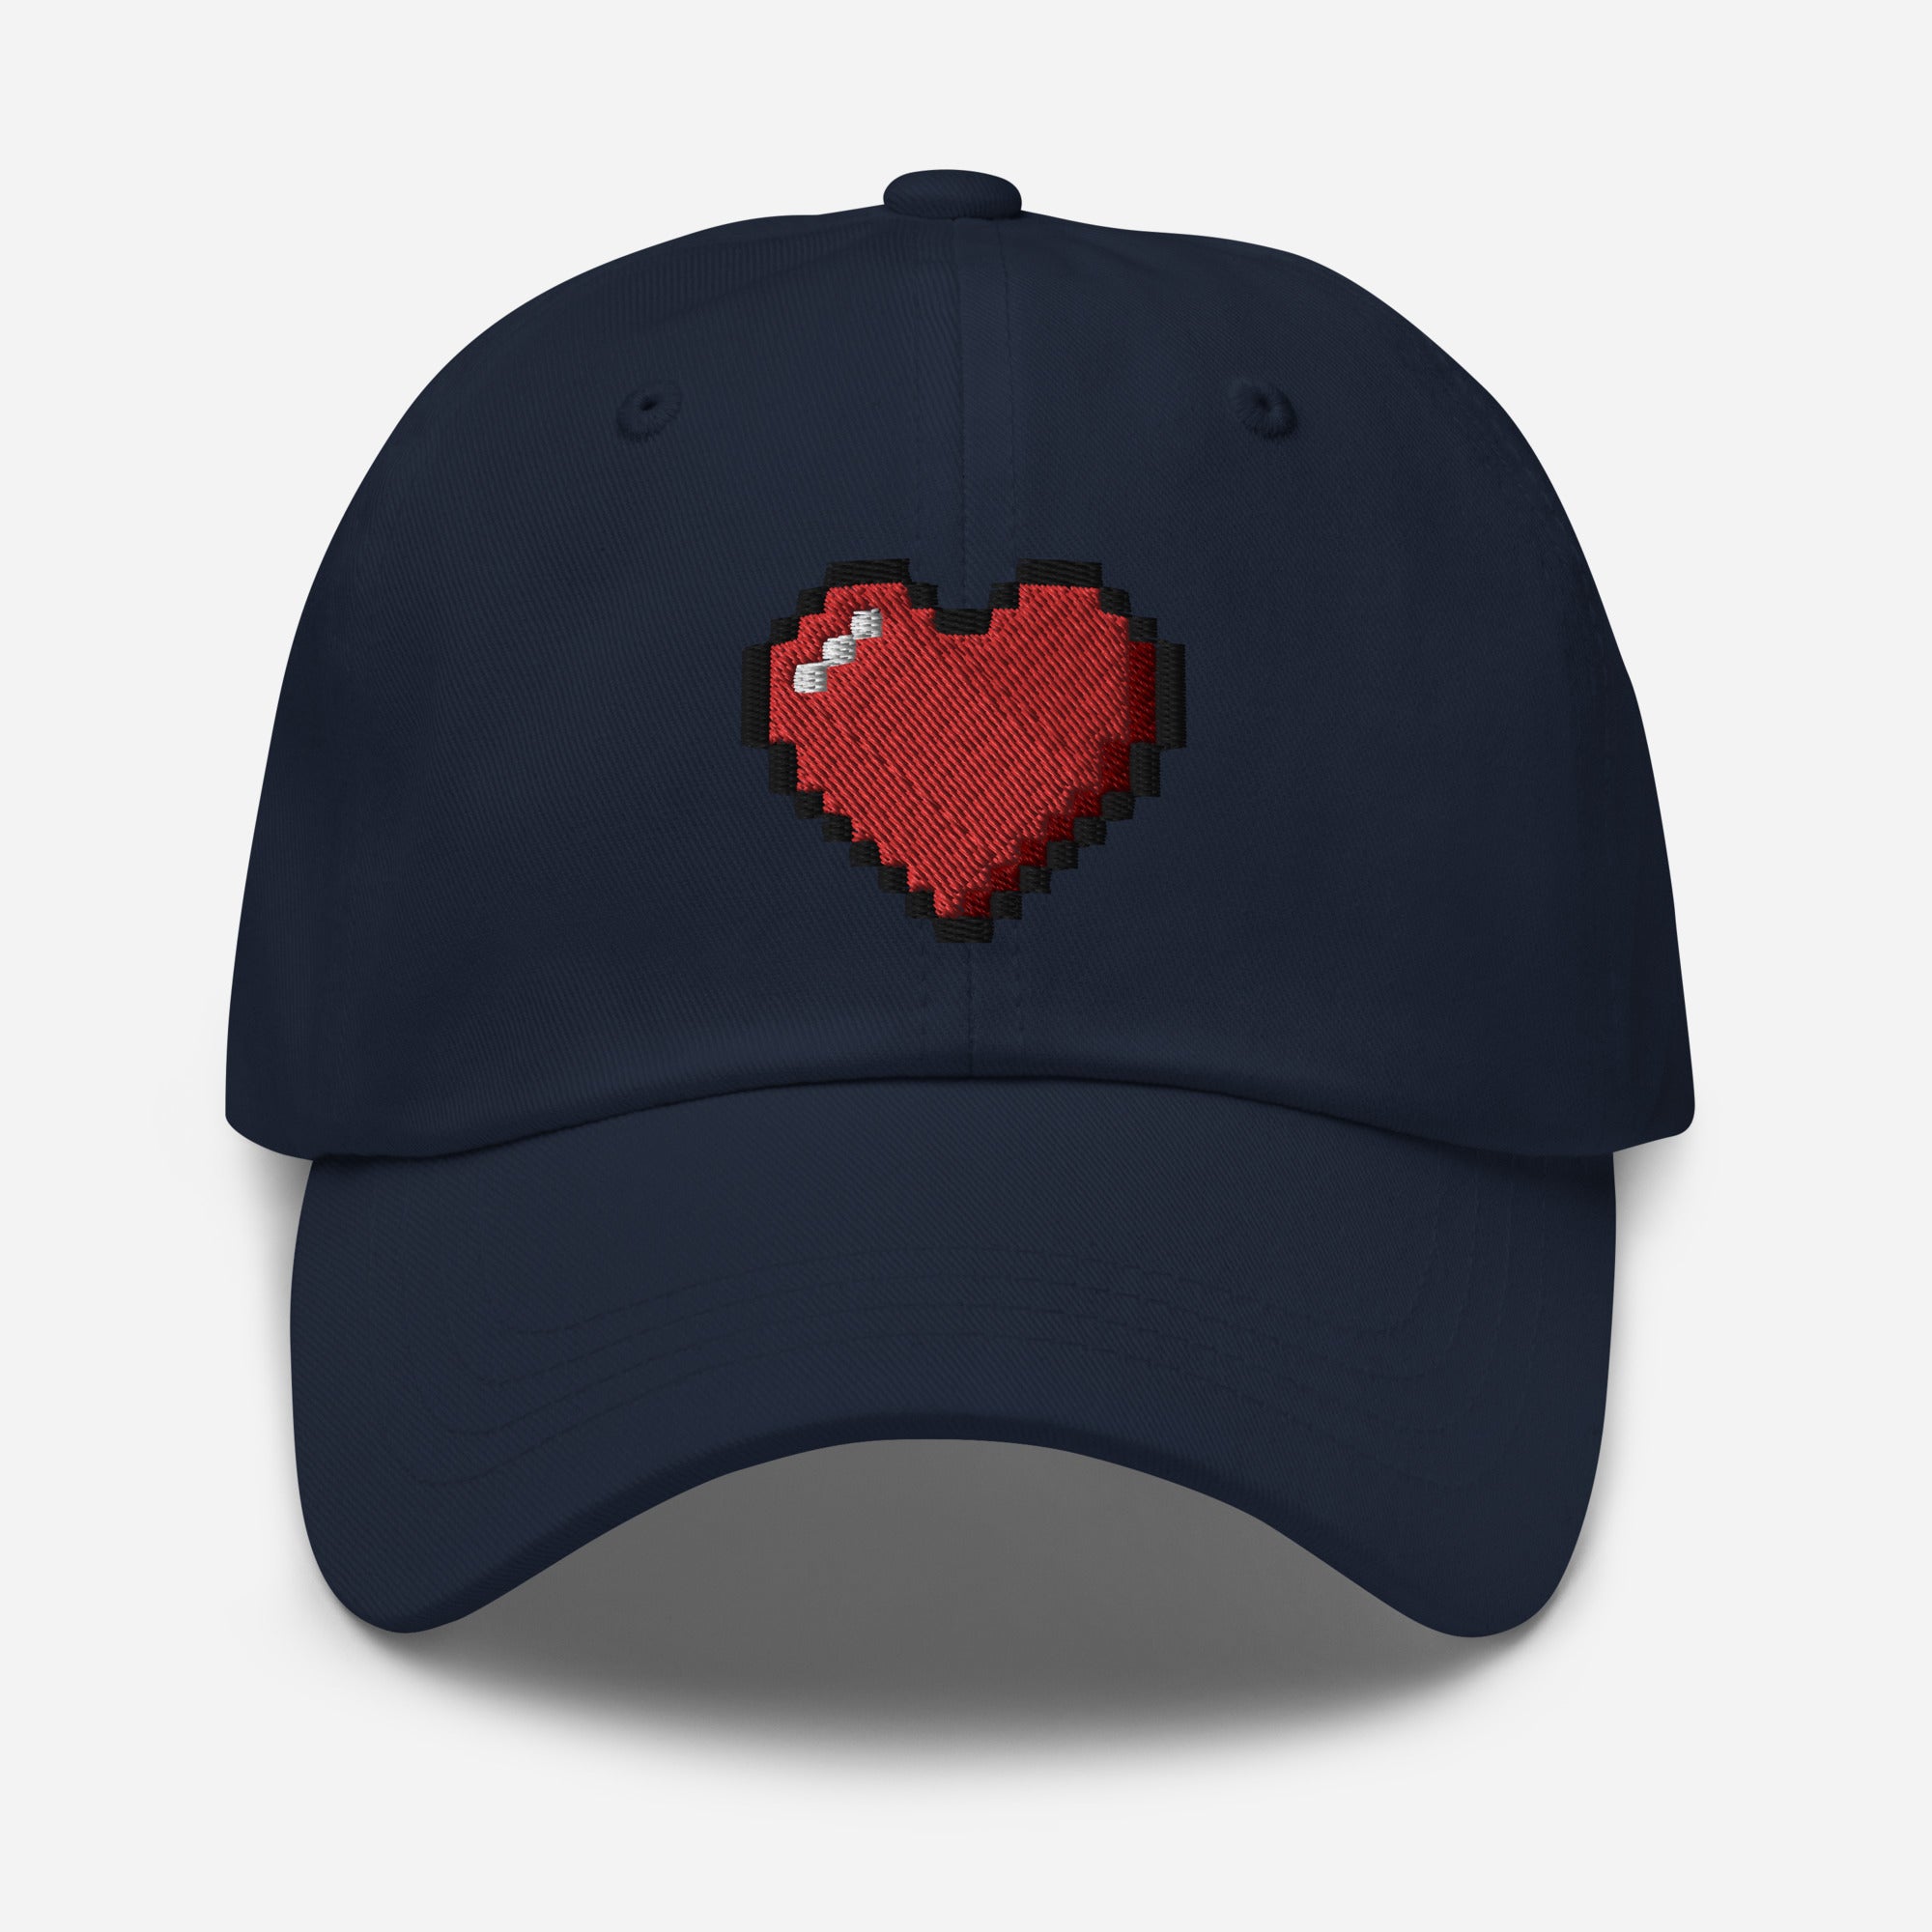 Retro 8 Bit Video Game Pixelated Heart Embroidered Baseball Cap Dad hat